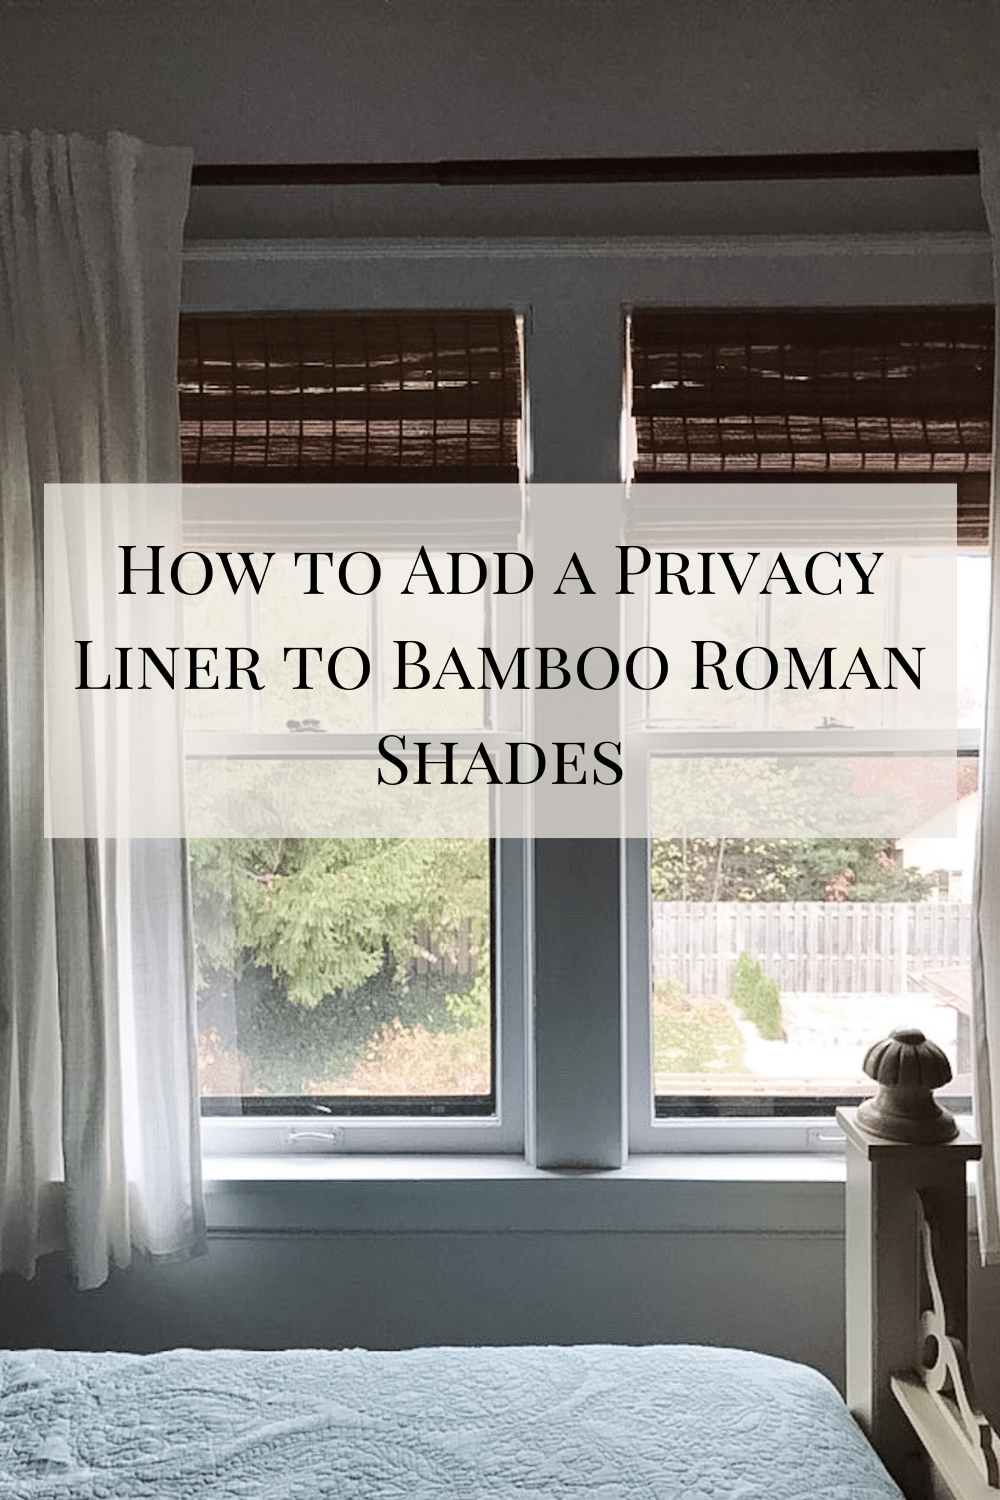 How to Add a Privacy Liner to Bamboo Roman Shades